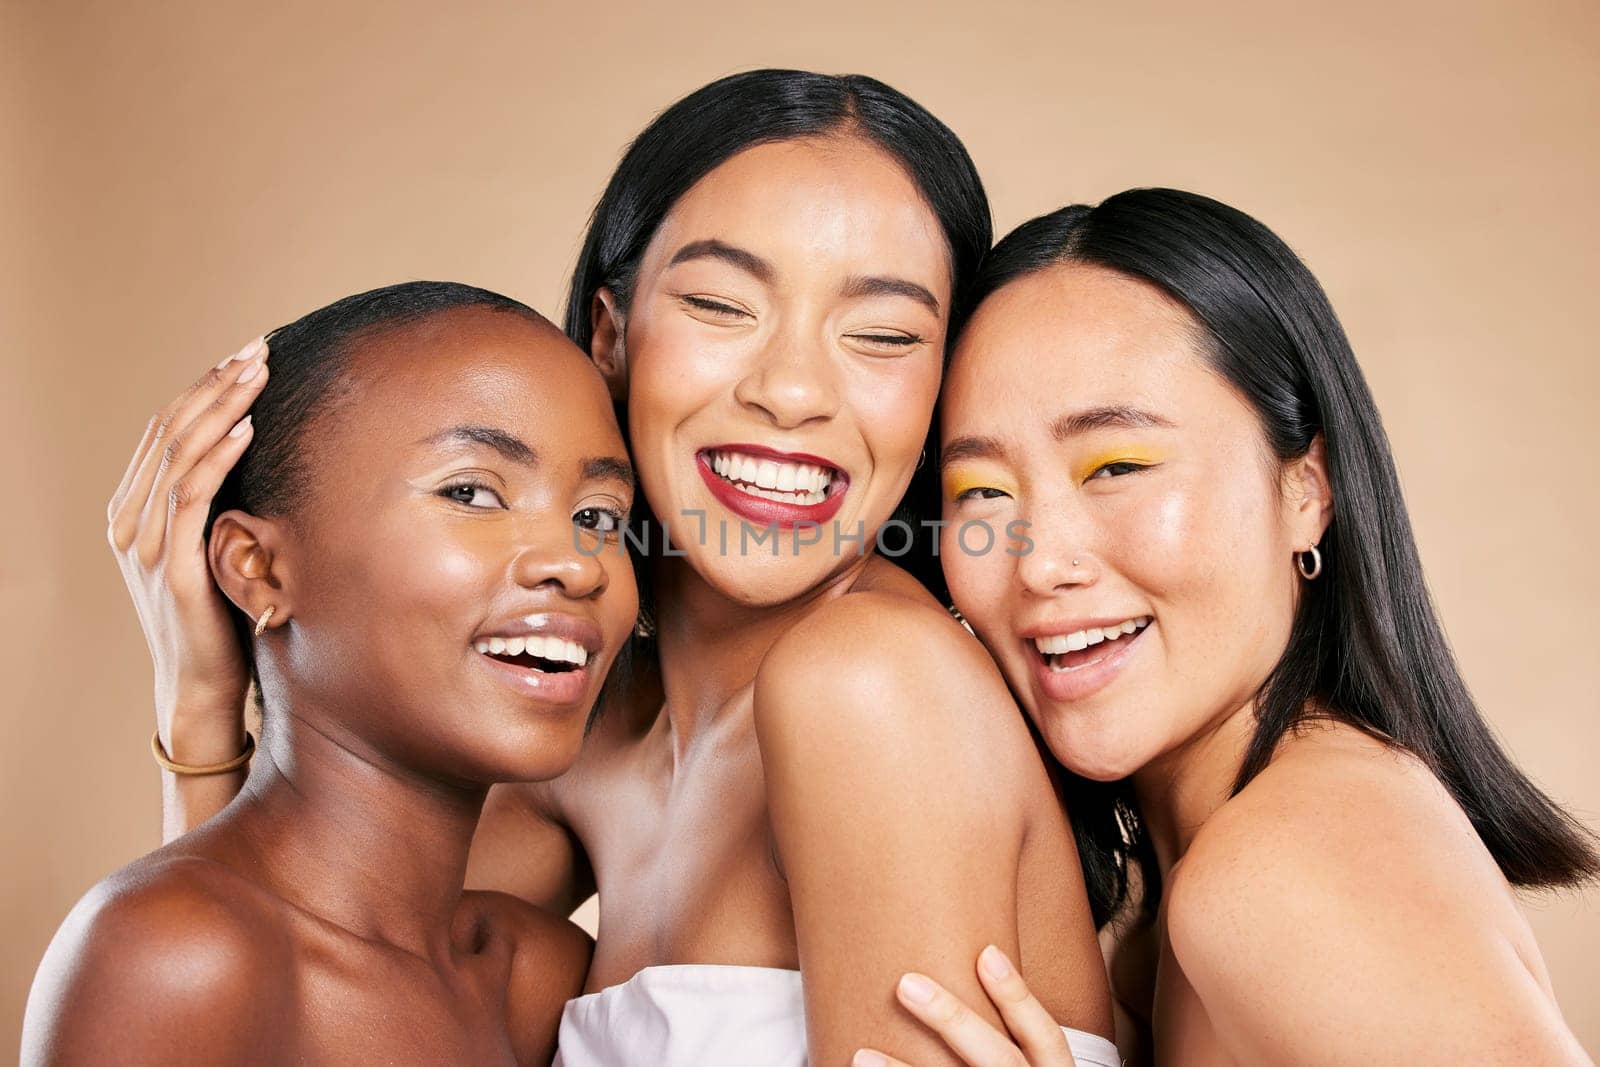 Happy women, portrait smile and hug in beauty for skincare, cosmetics or makeup against a studio background. People, friends or models smiling in happiness or satisfaction for fun healthy treatment.